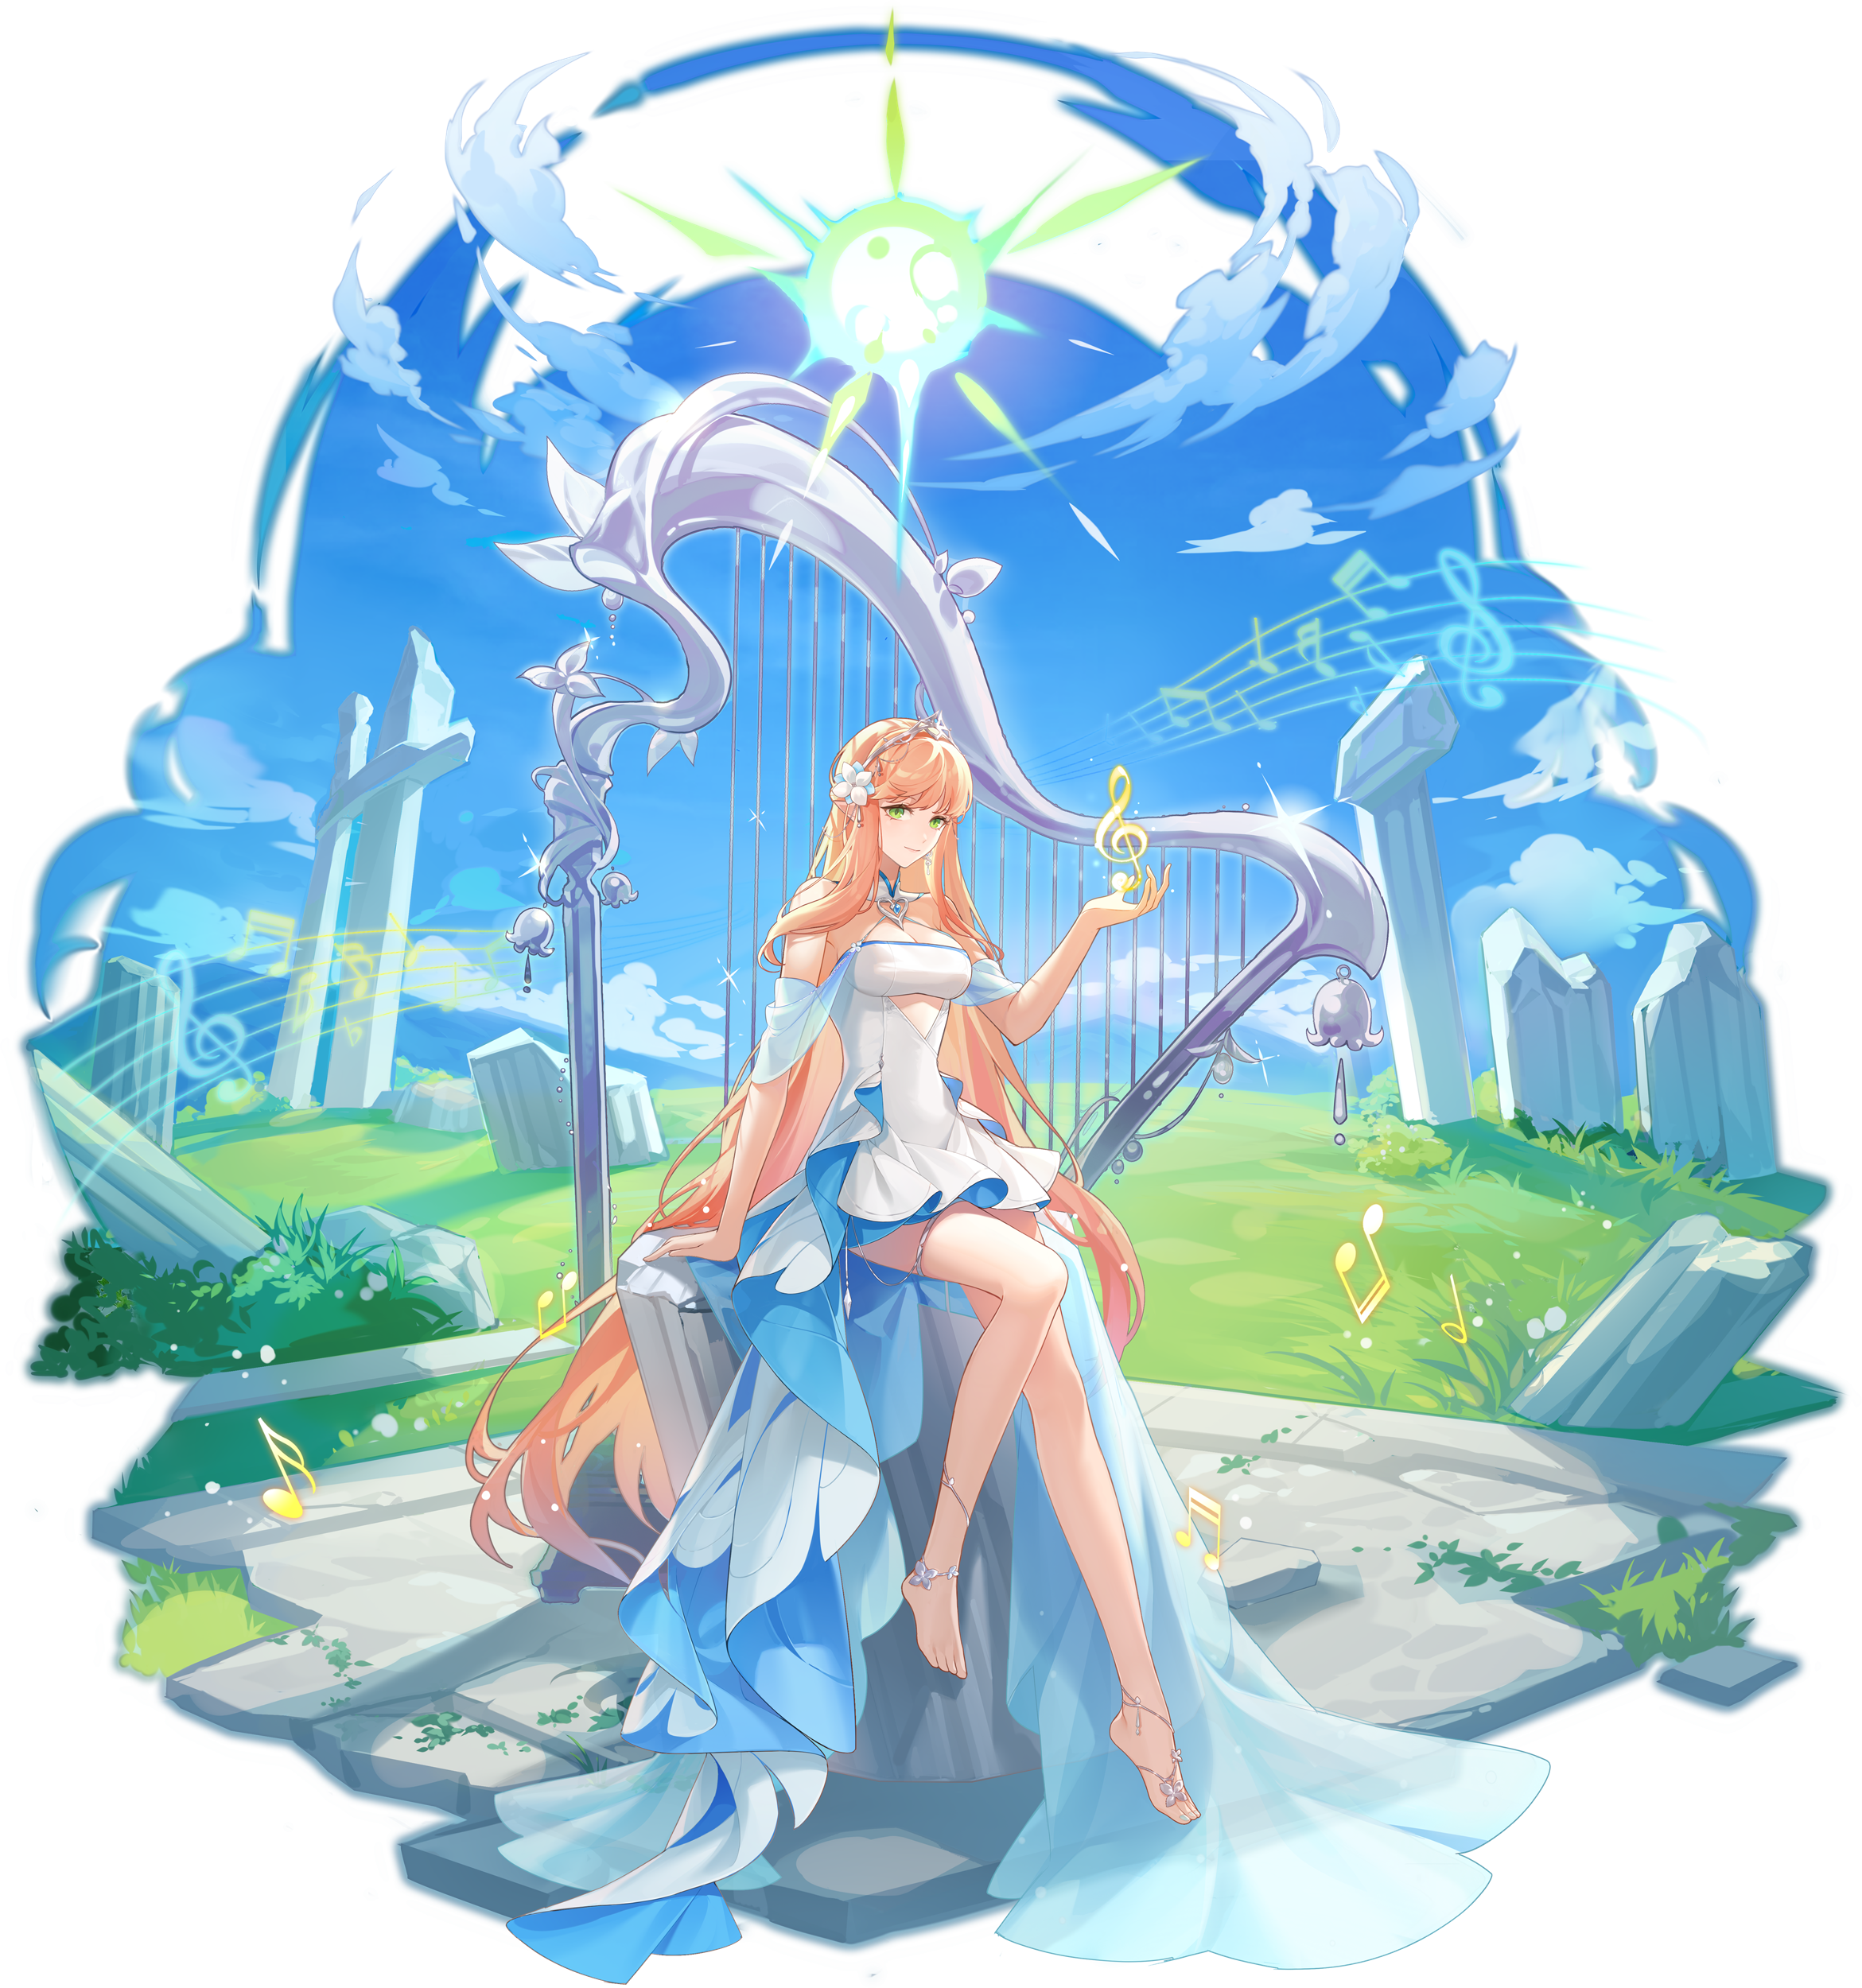 Anime 2341x2500 Aura star boobs video game characters harp notes musical instrument